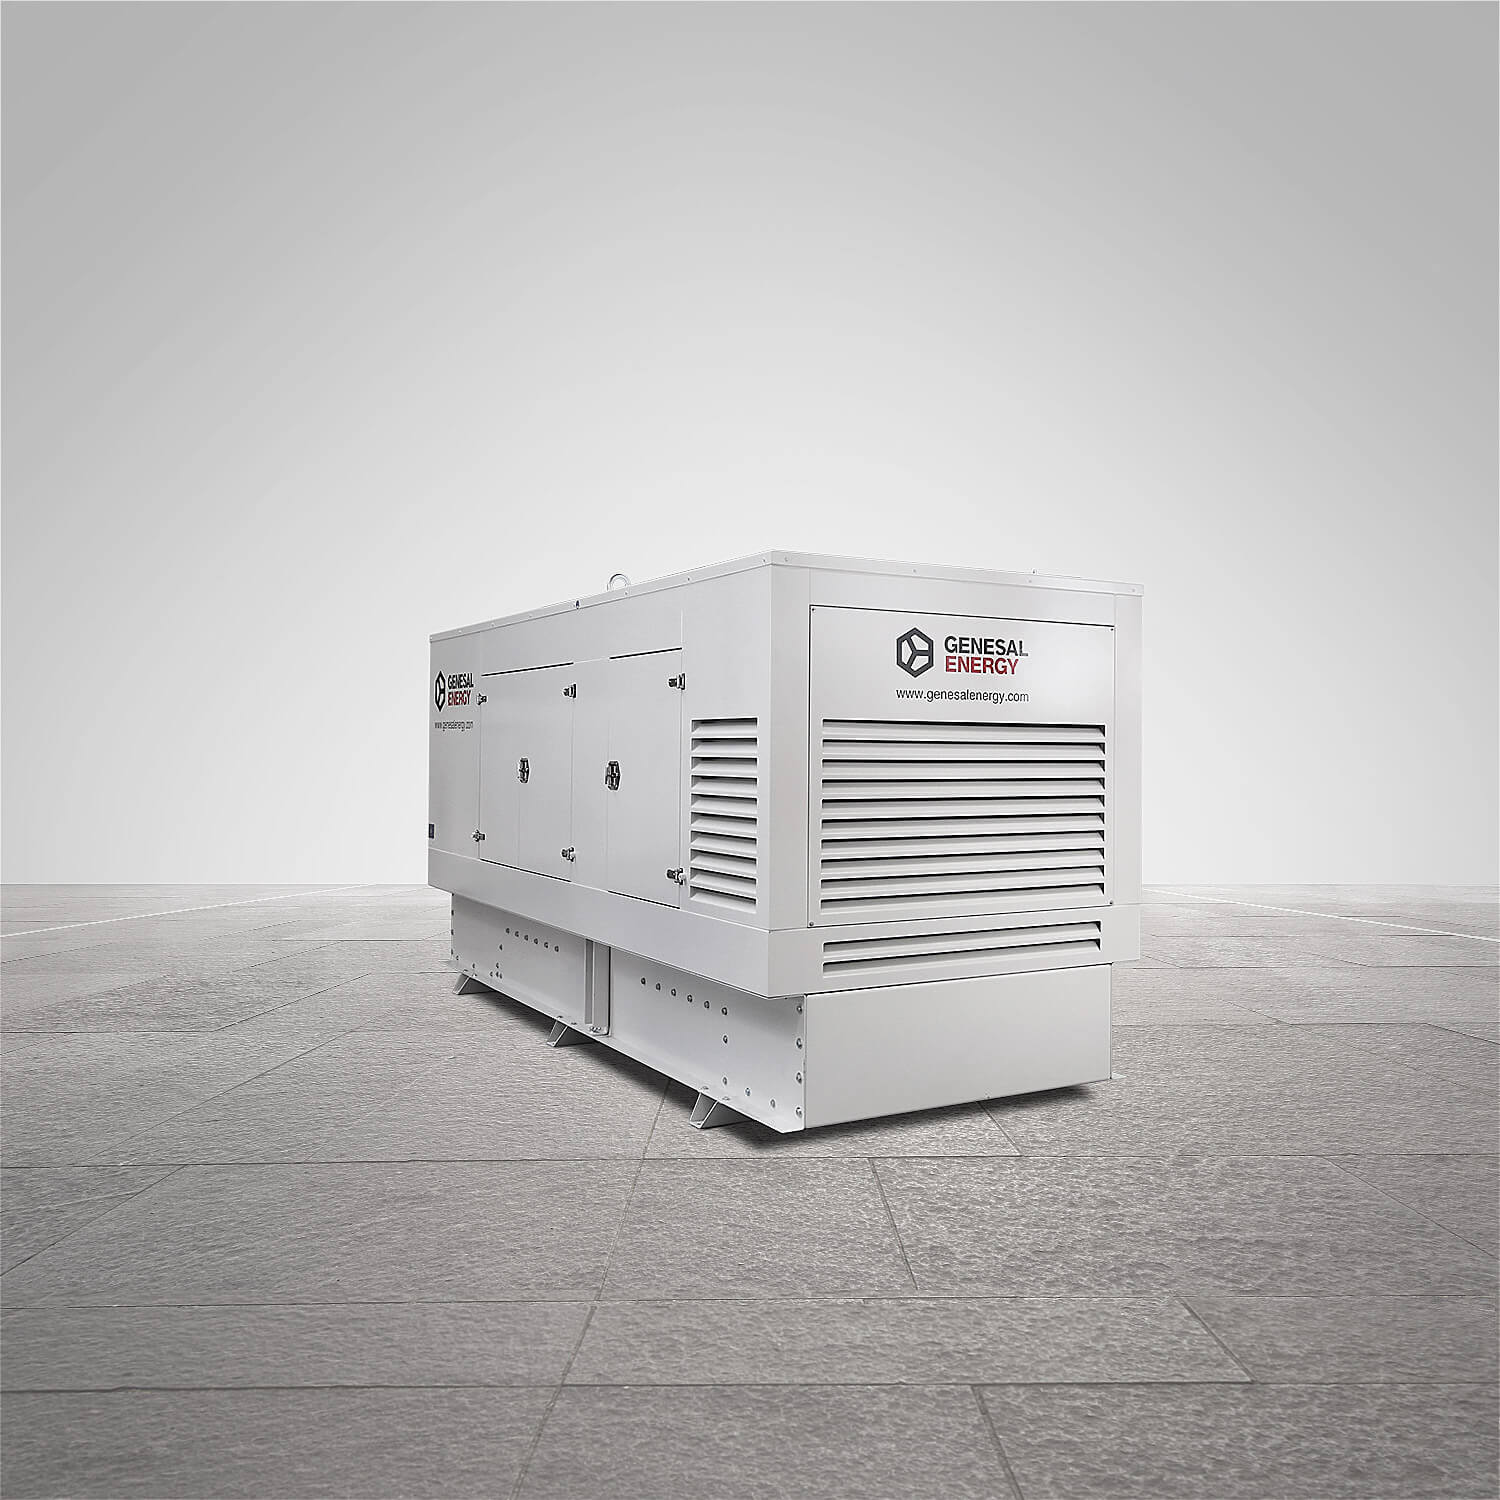 We supplied 24 gensets to guarantee the power supply in the Balearic Islands